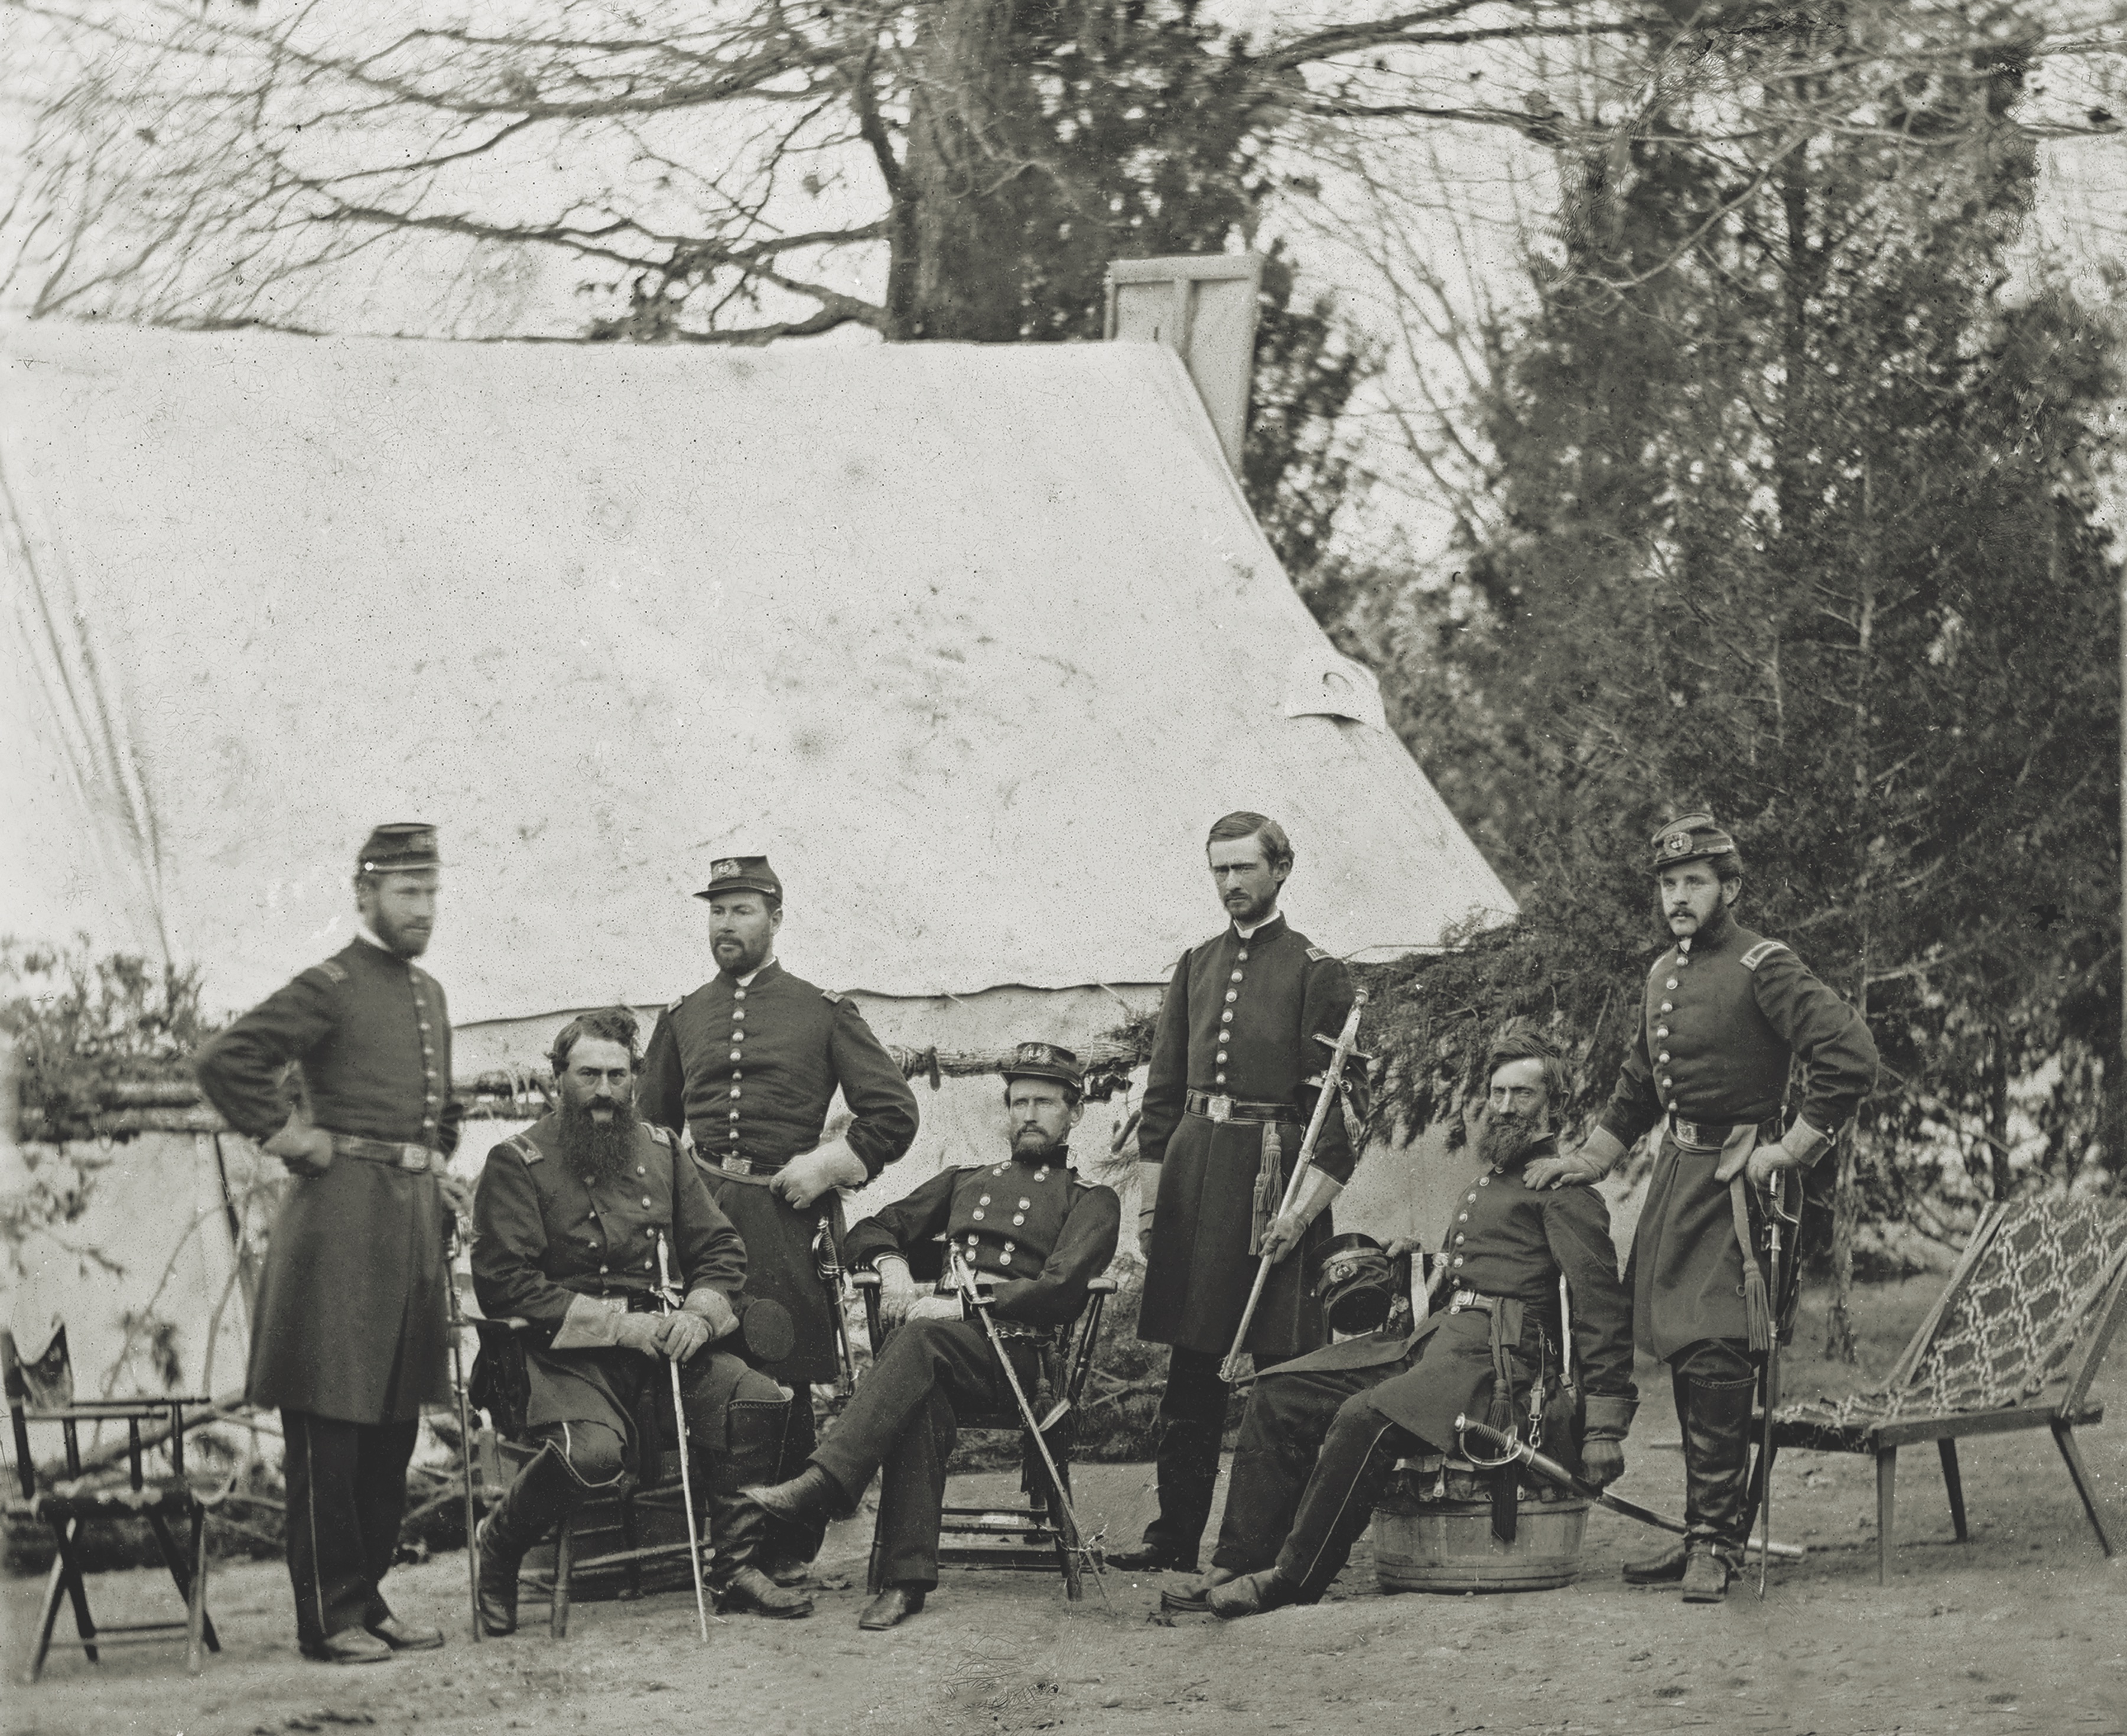 Pickett’s Star-Crossed Counterpart John Peck (seated, center) and officers, early in the war. In 1862-63, Peck had a key role in the Peninsula Campaign and the defense of Suffolk, Va., but was soon shelved by poor health leading the District of North Carolina. (Library of Congress)